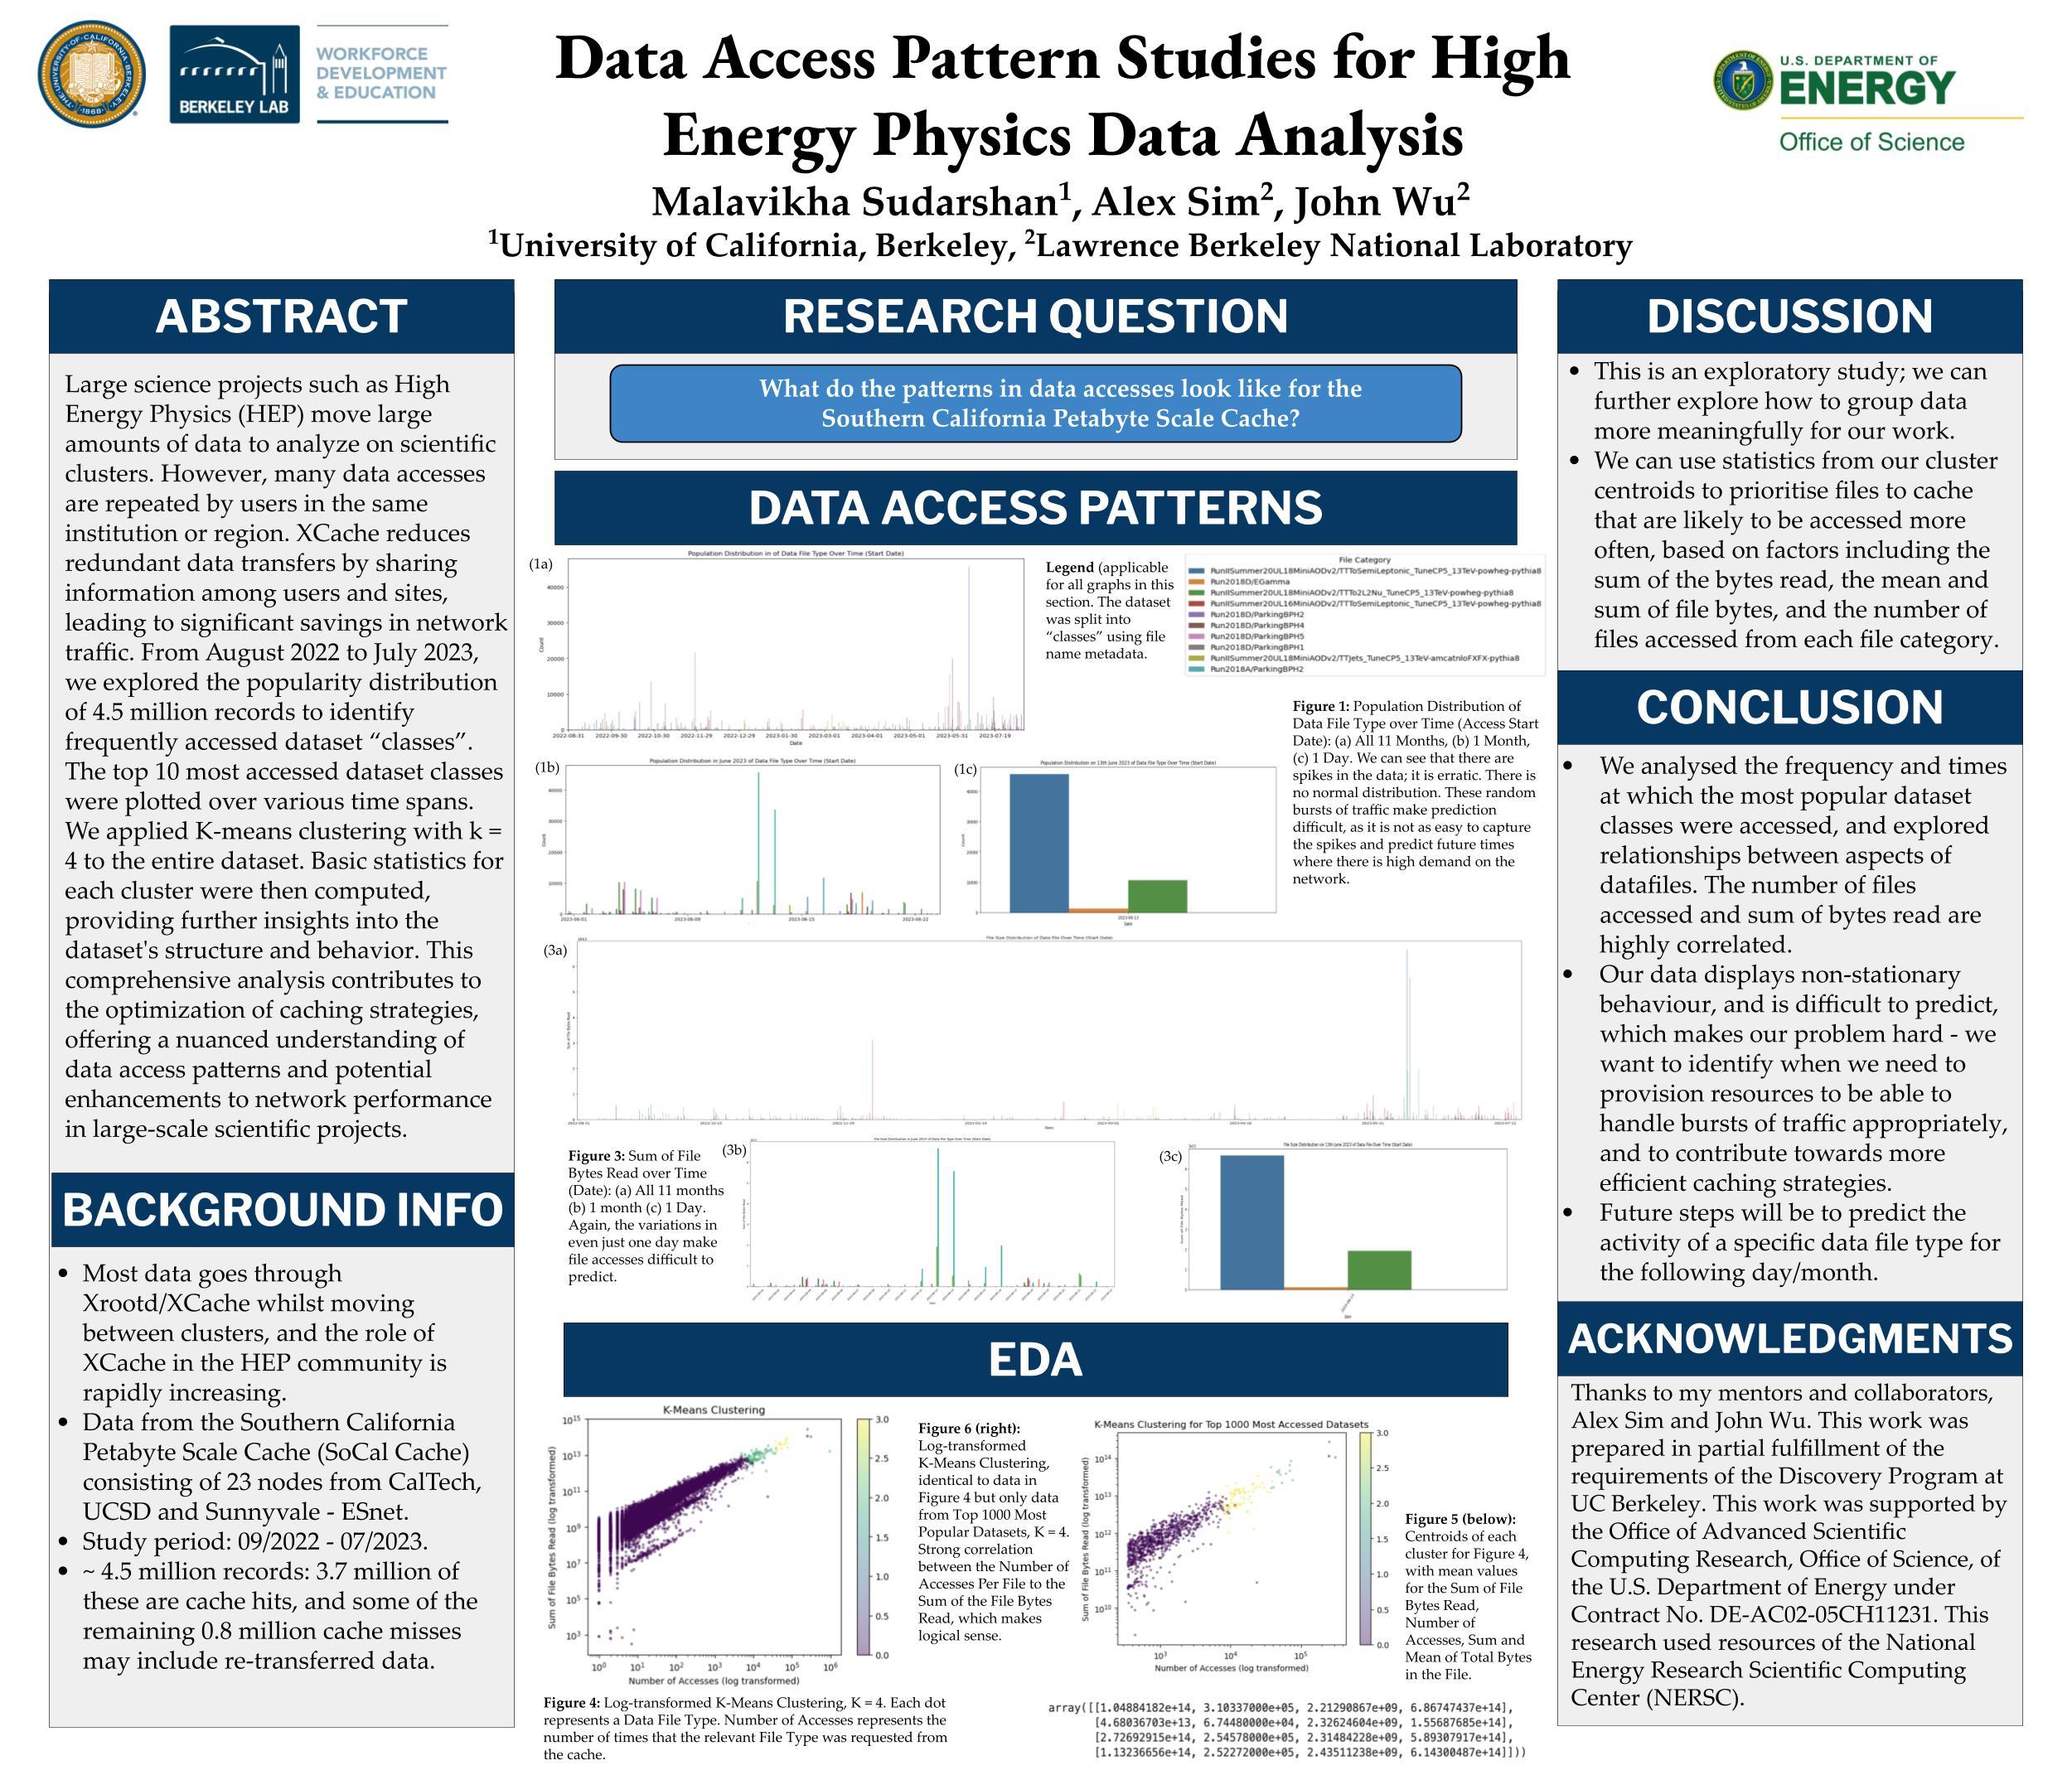 Data Access Pattern Studies for High Energy Physics Data Analysis - Spring 2023 Discovery Project